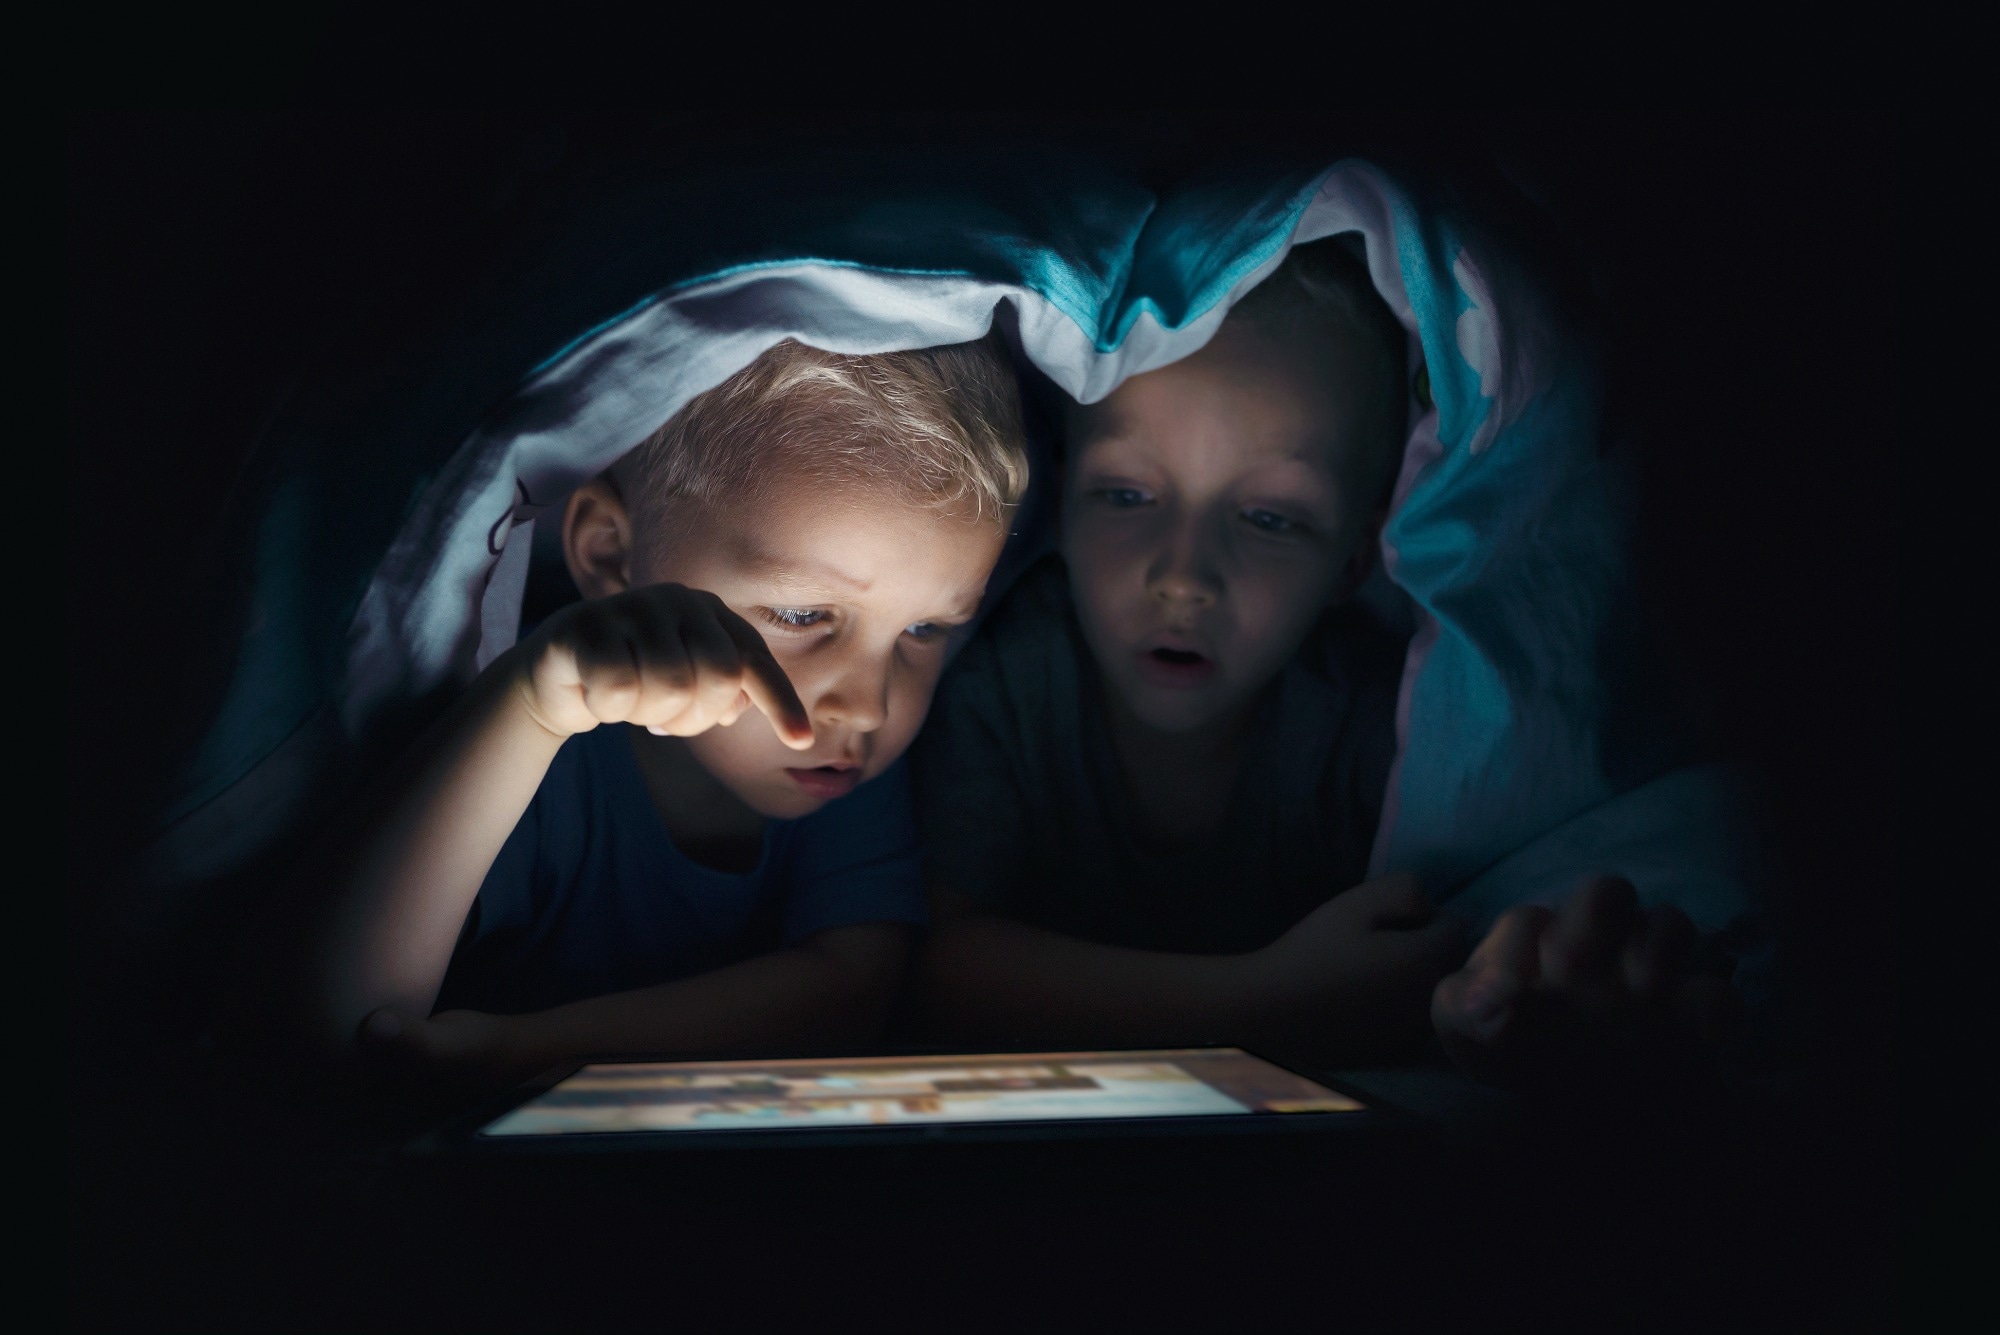 Study: Problematic Child Media Use During the COVID-19 Pandemic. Image Credit: Proxima Studio/Shutterstock